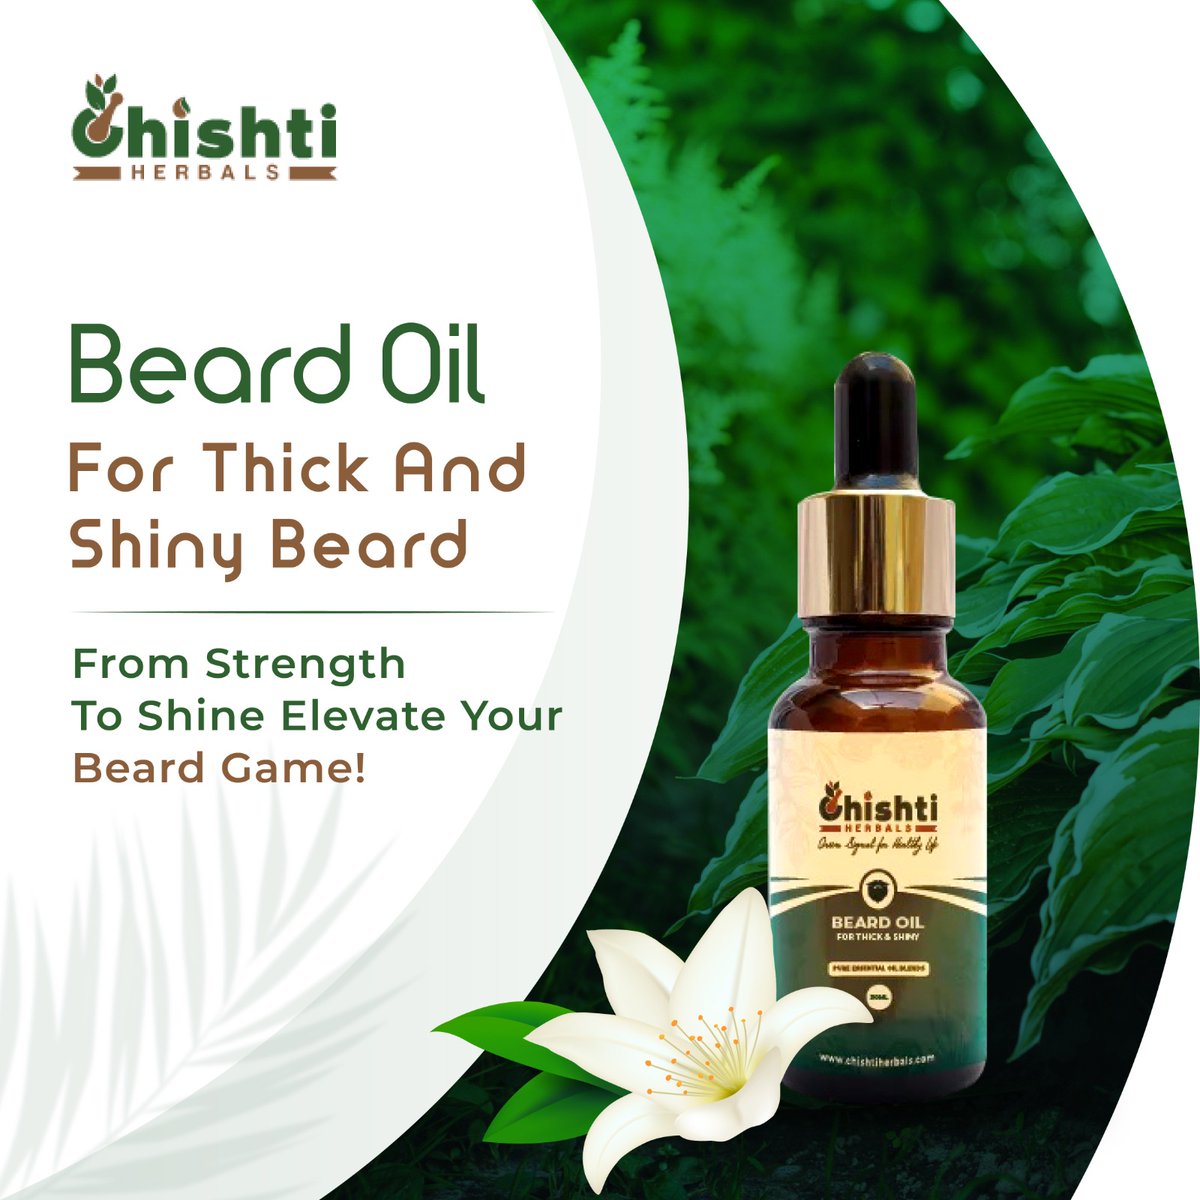 Boost your your beard game with our premium oil! Strength and shine in every drop. 

🌐 Order Now:
chishtiherbals.com

#BeardGang #BeardCare #BeardOil #HealthyBeard #HairLossSolution #NaturalHairCare #GroomingEssentials